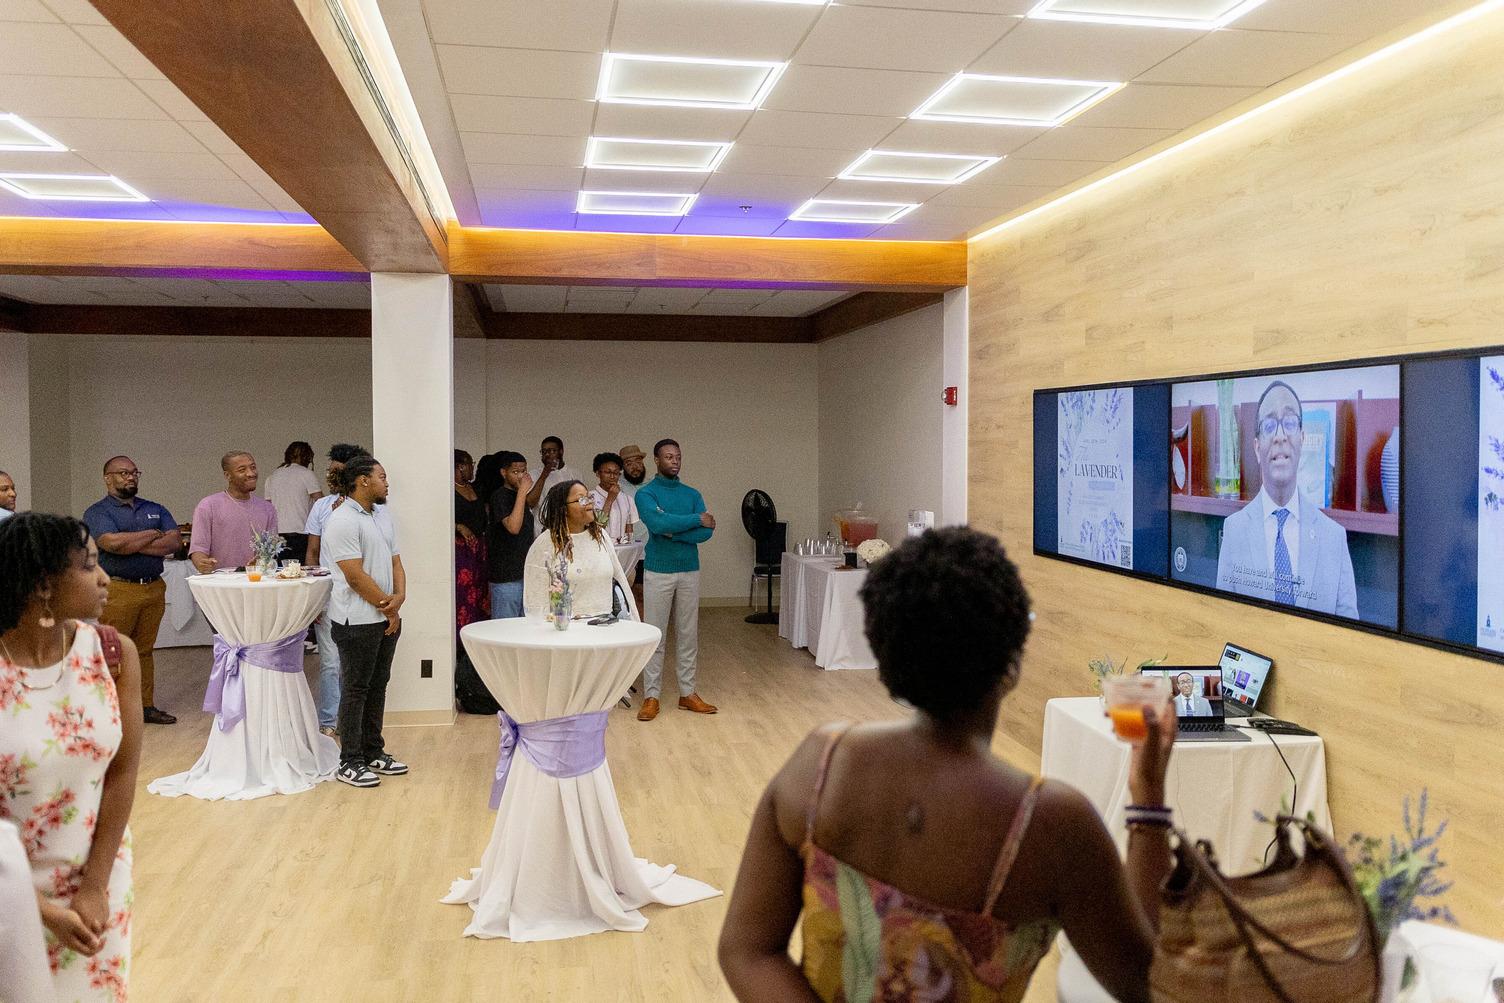 Through video message, Howard University 18th President Ben Vinson III delivered congratulatory remarks to the lavender graduation’s honorees. “I commend you all for what you’ve done to transform our campus culturally, while being our top scholars inside the classroom.” 